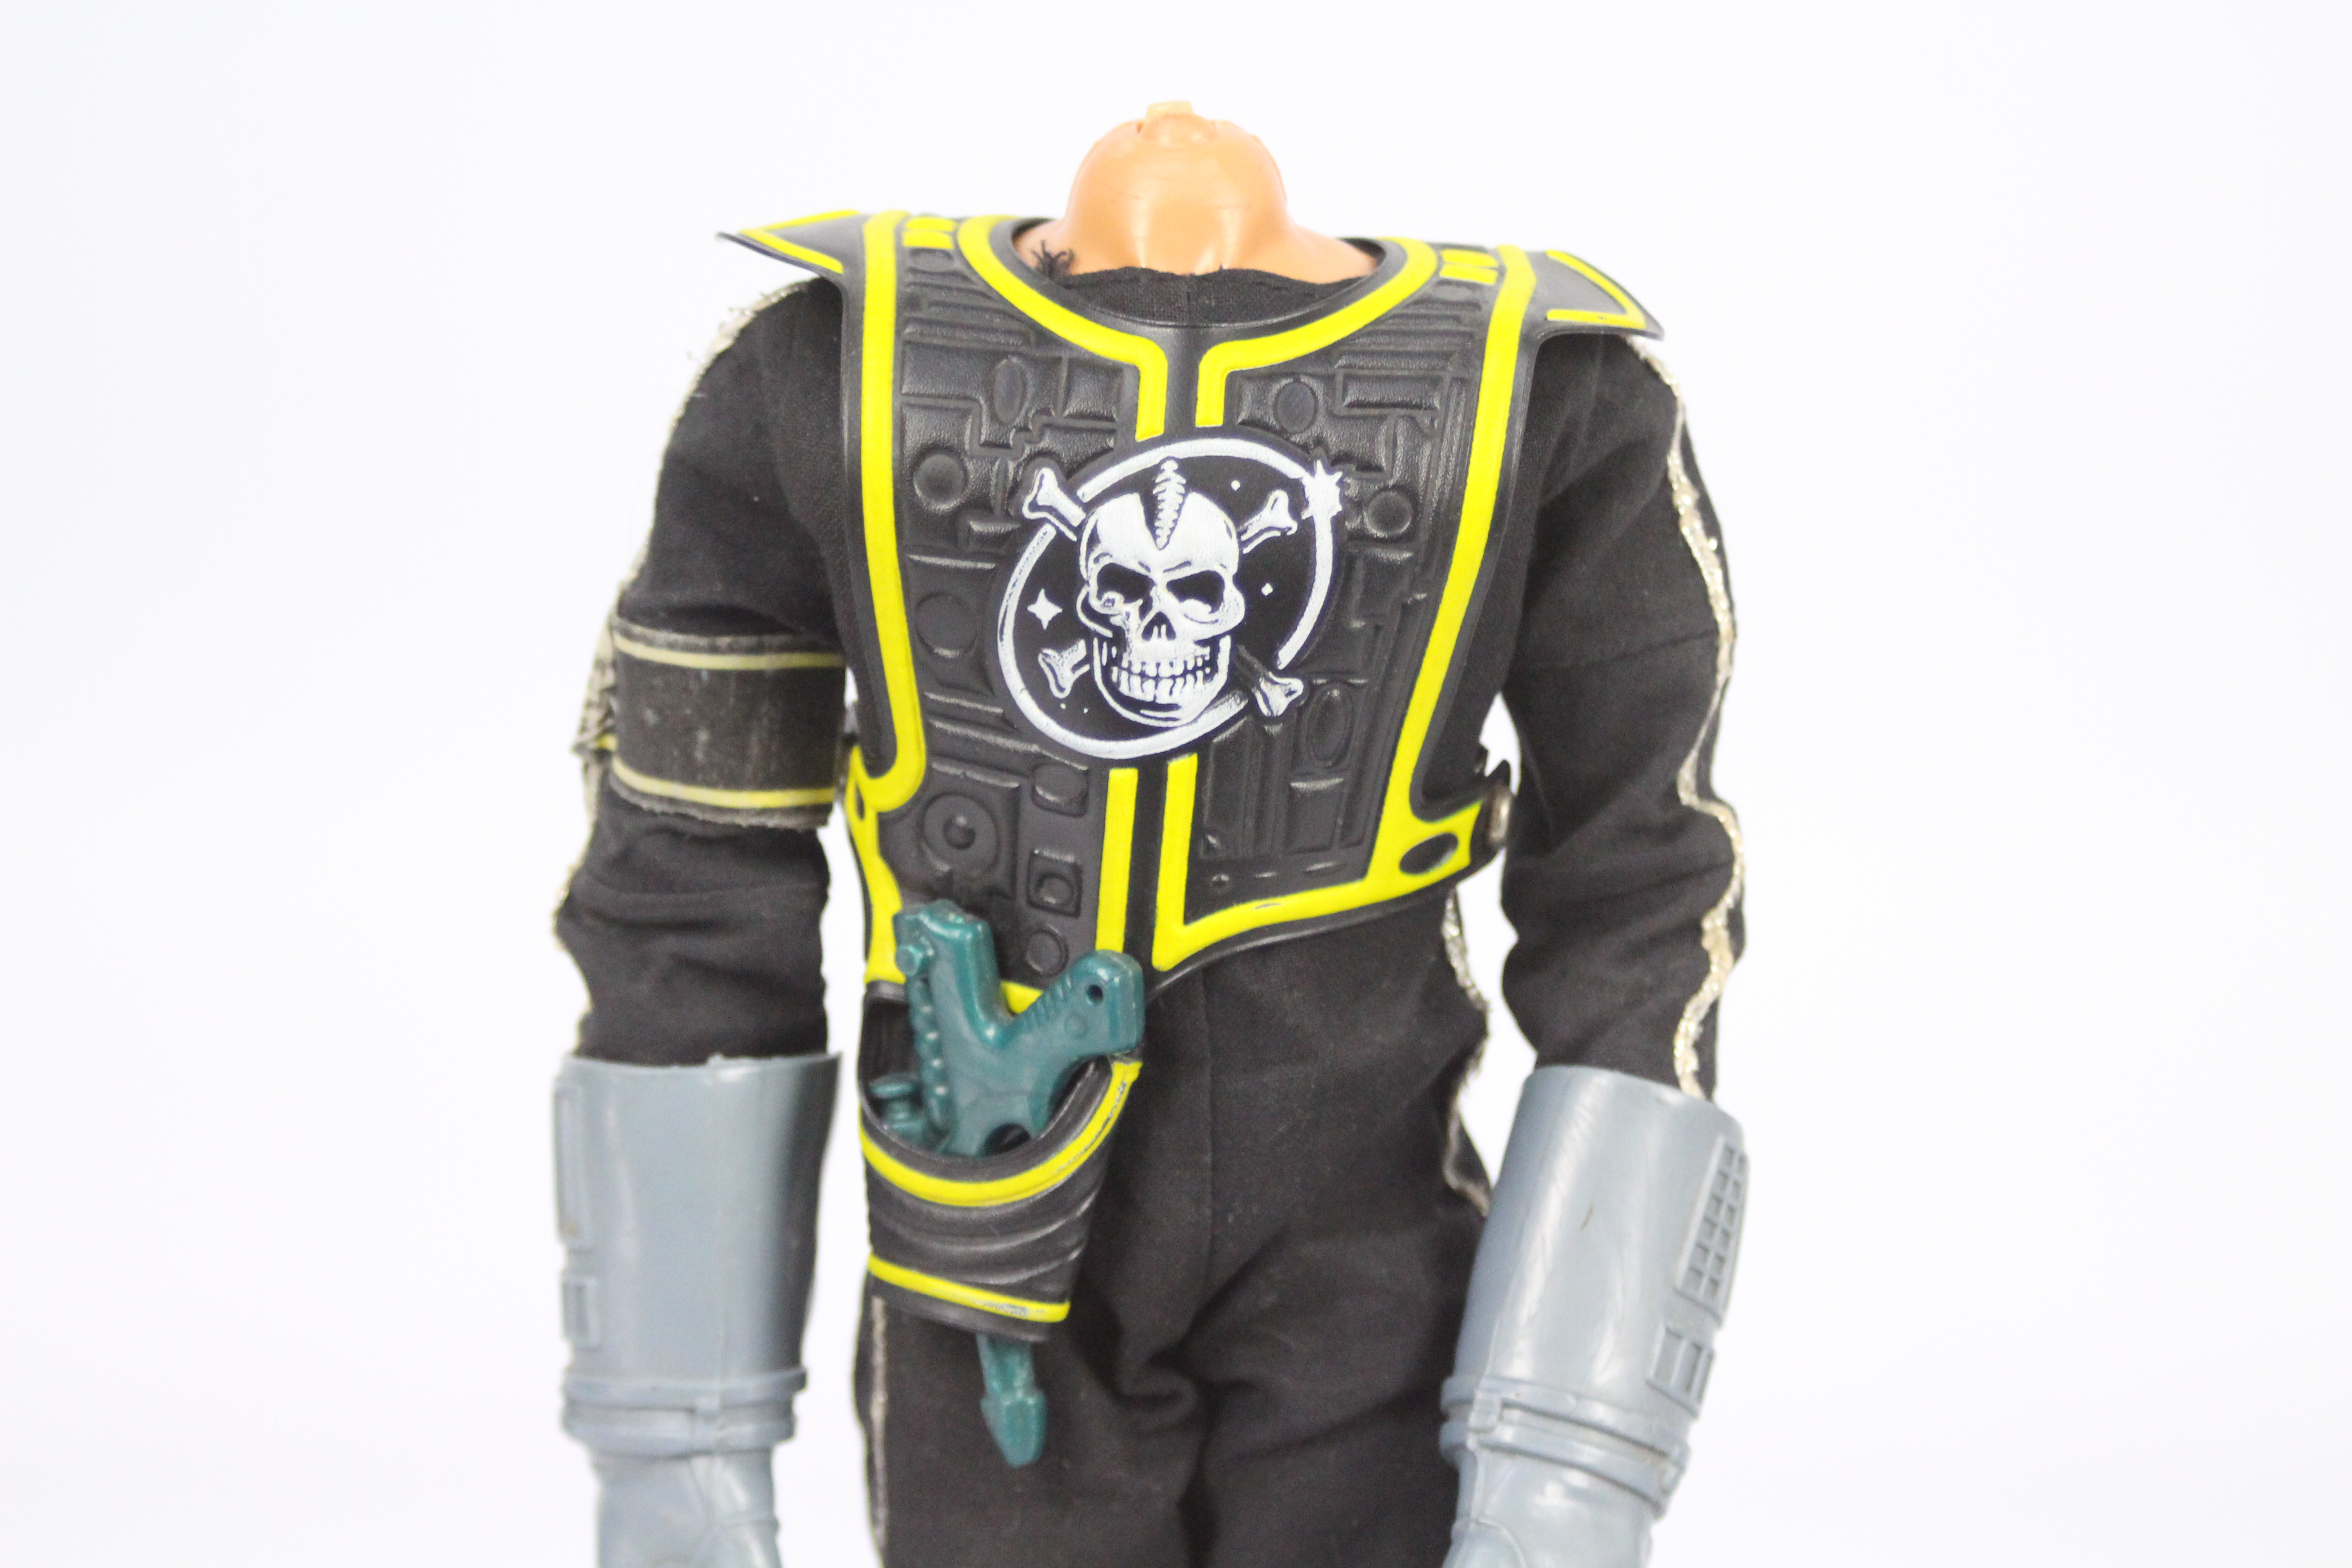 Palitoy, Action Man - A Palitoy Eagle-Eye Action Man figure in Zargonite Space Pirate outfit. - Image 2 of 9